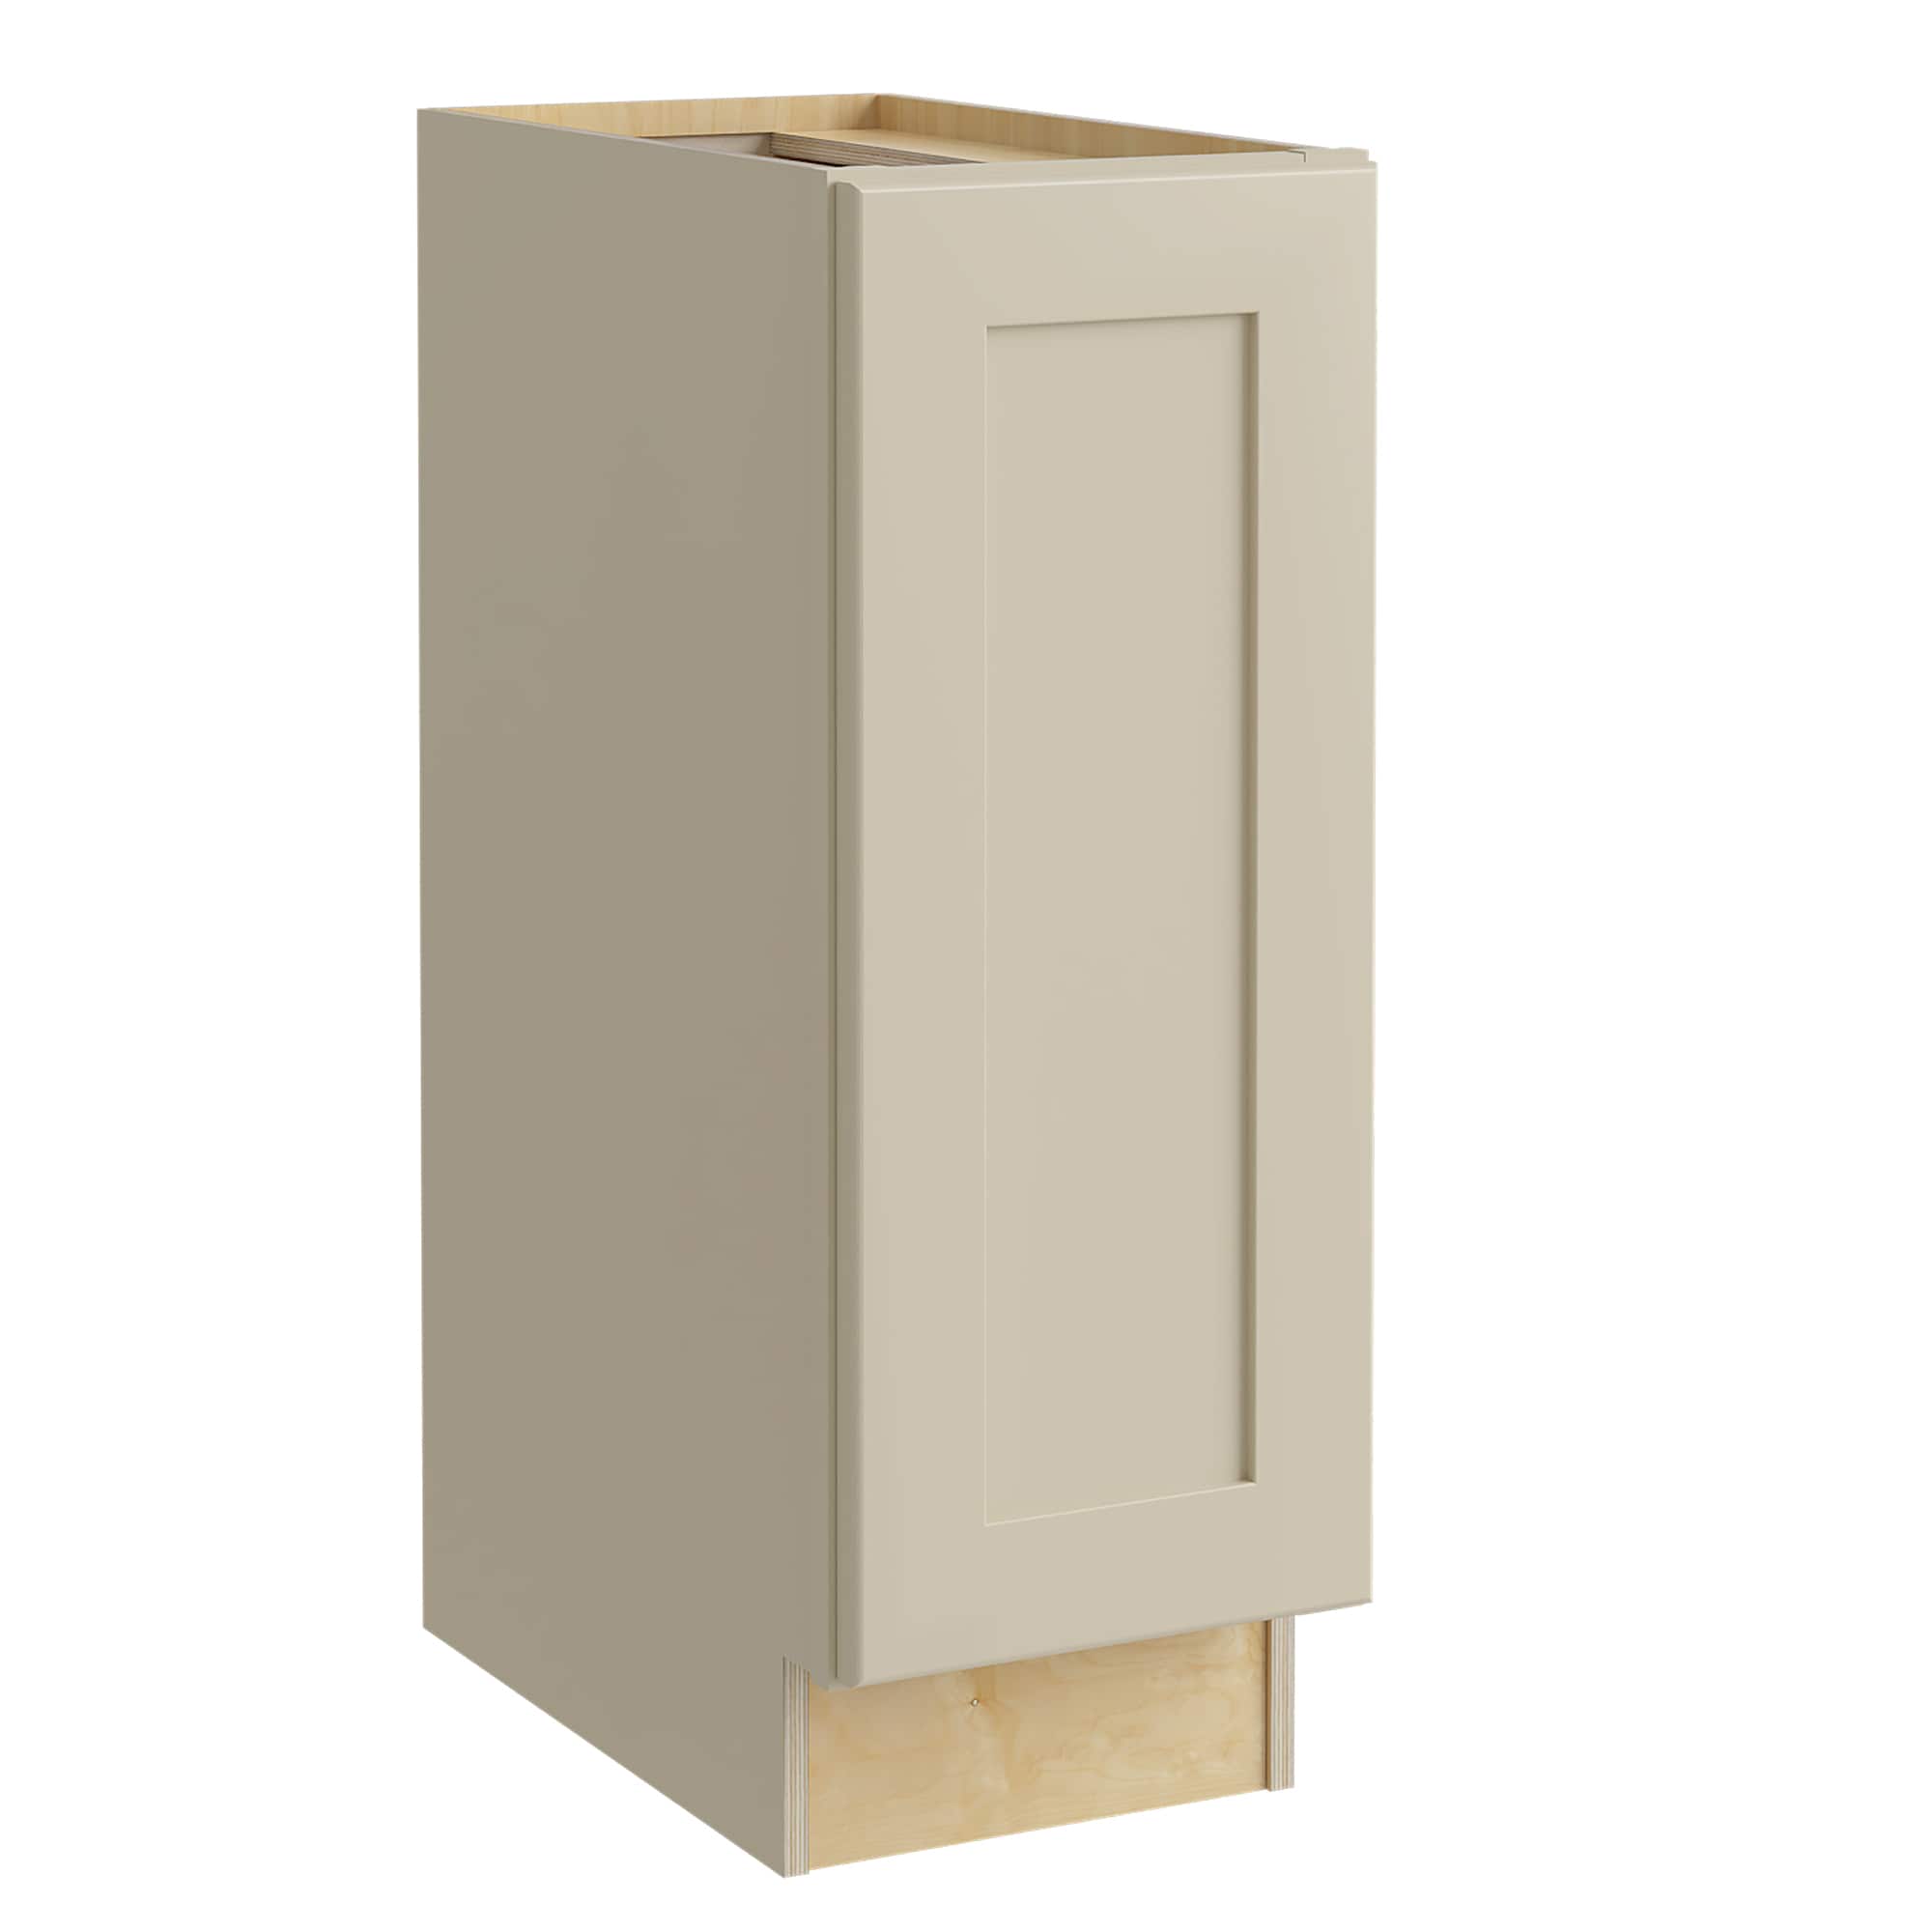 Luxxe Cabinetry 21-in W x 34.5-in H x 21-in D Norfolk Blended Cream Painted Door Base Fully Assembled Semi-custom Cabinet in Off-White | VB2121FHL-NBC